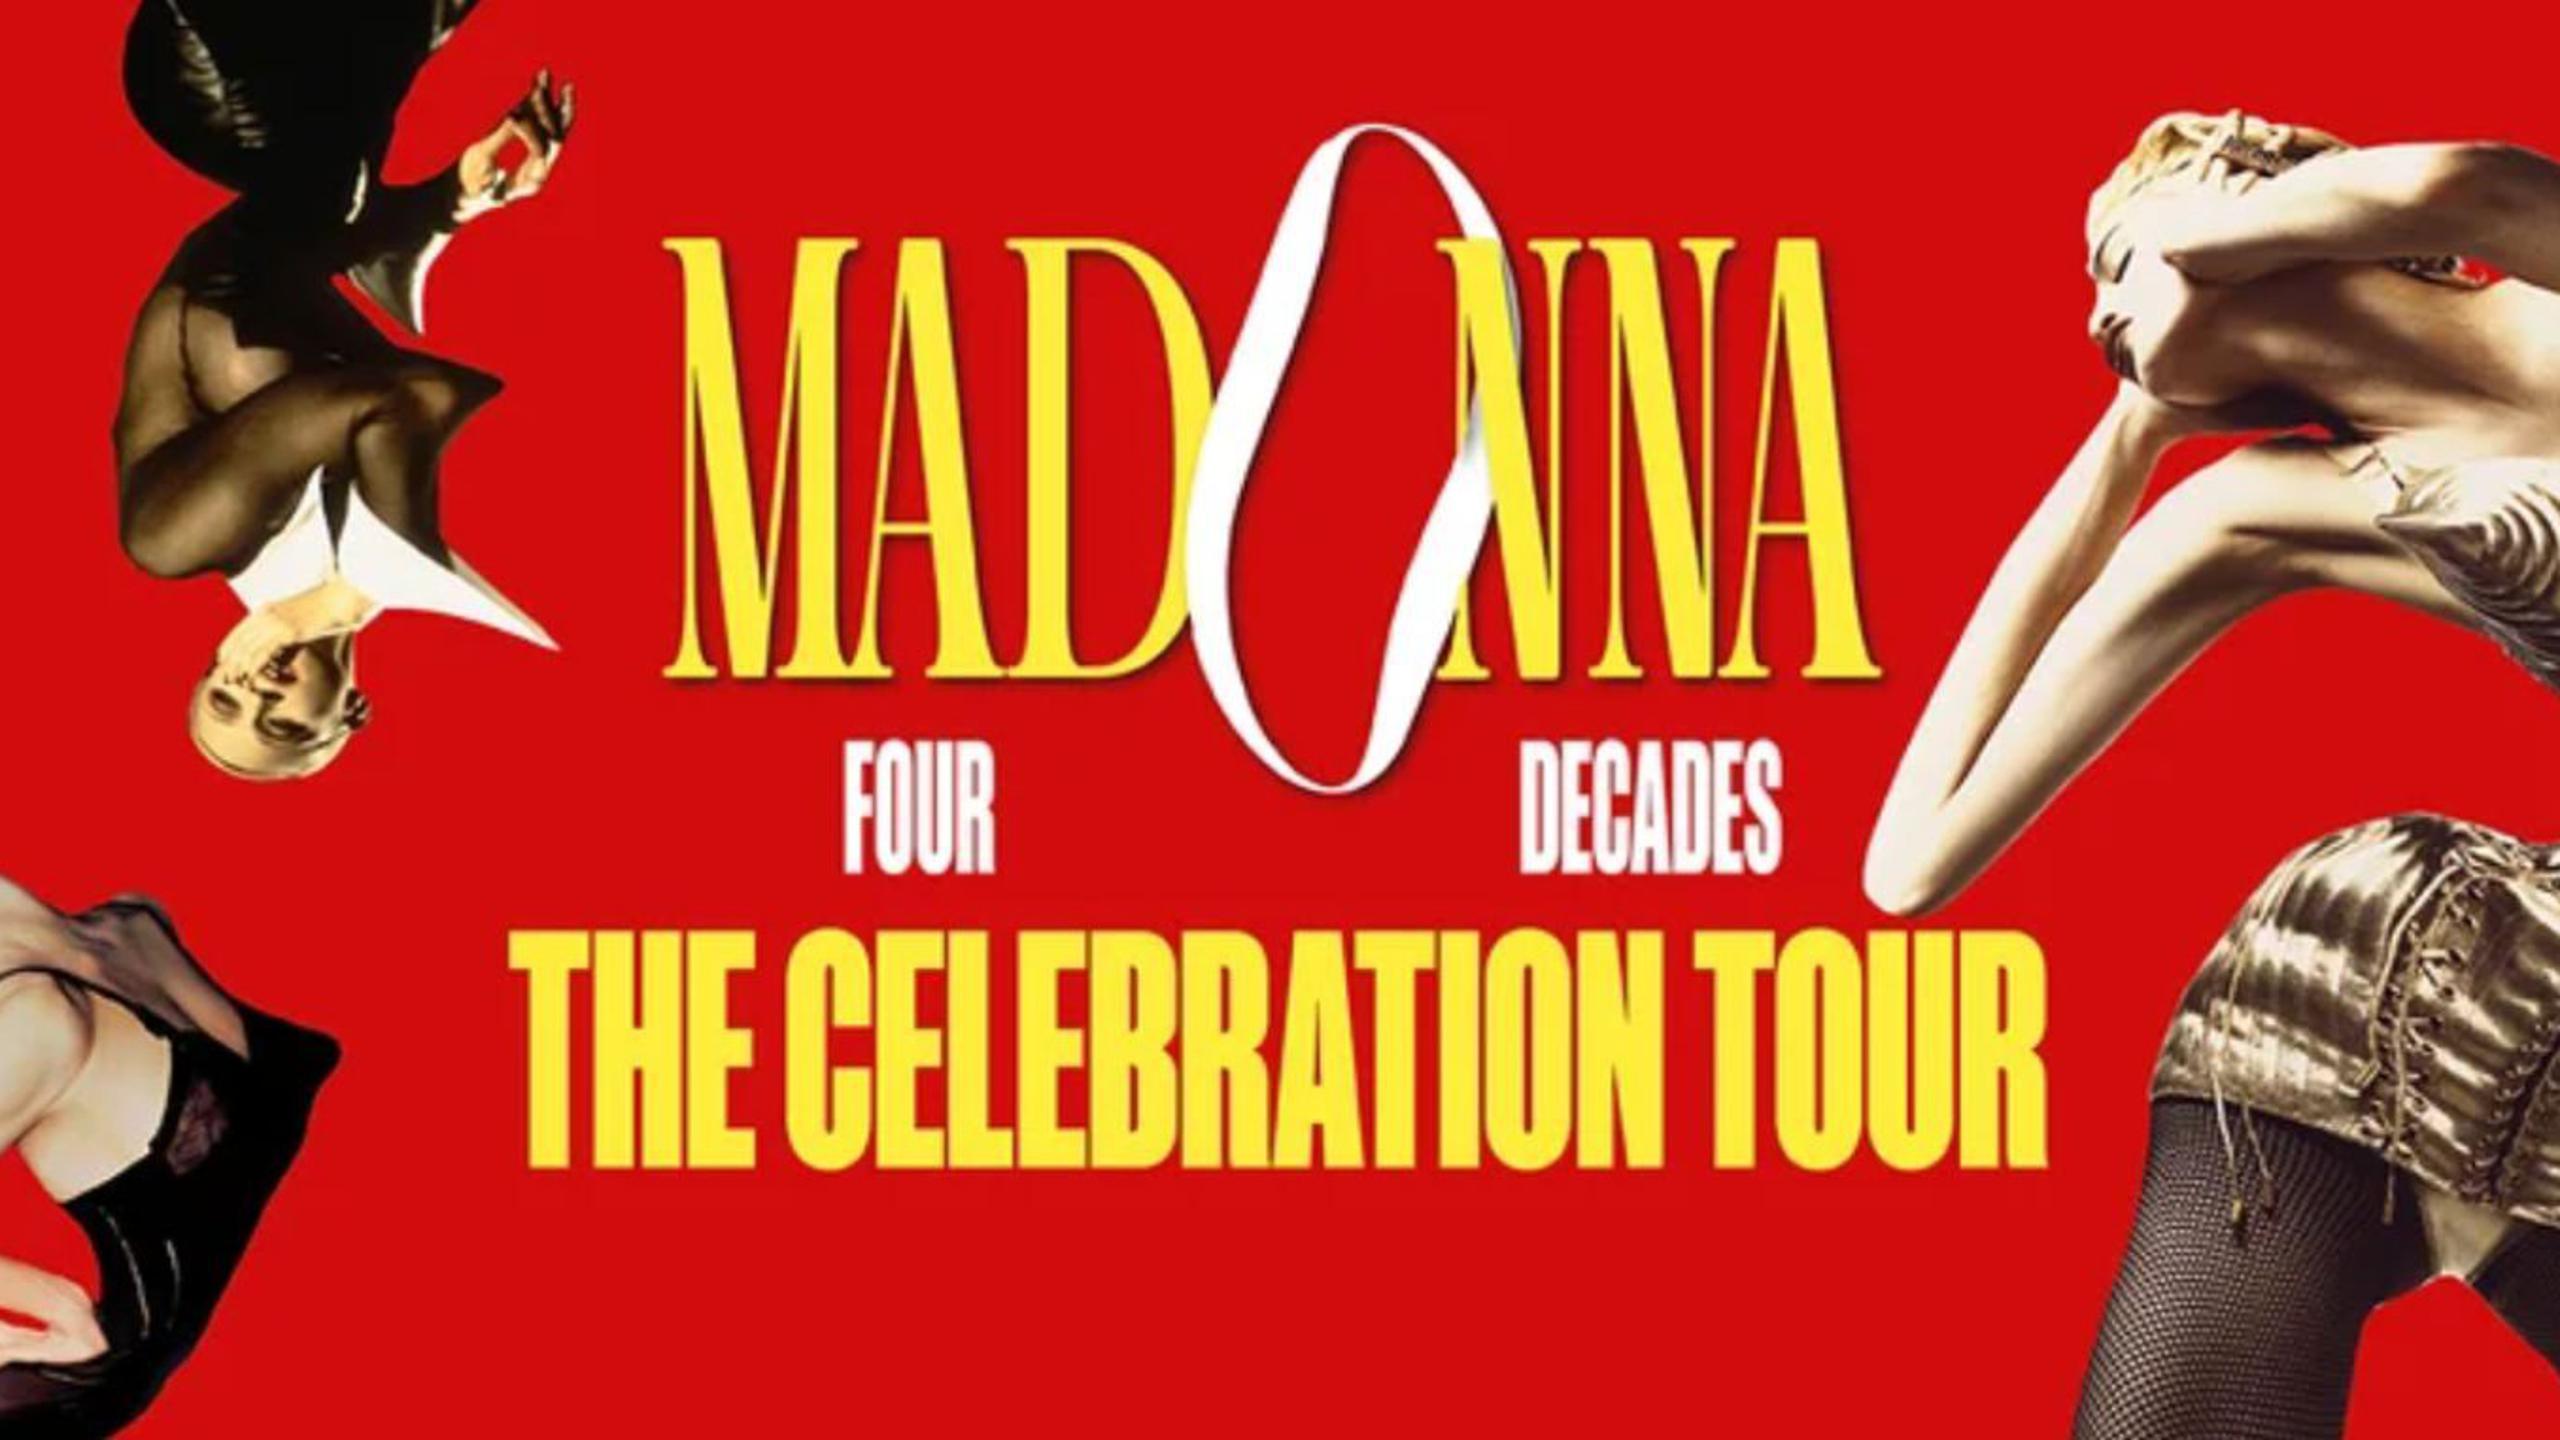 Madonna concert tickets for United Center, Chicago Wednesday, 9 August